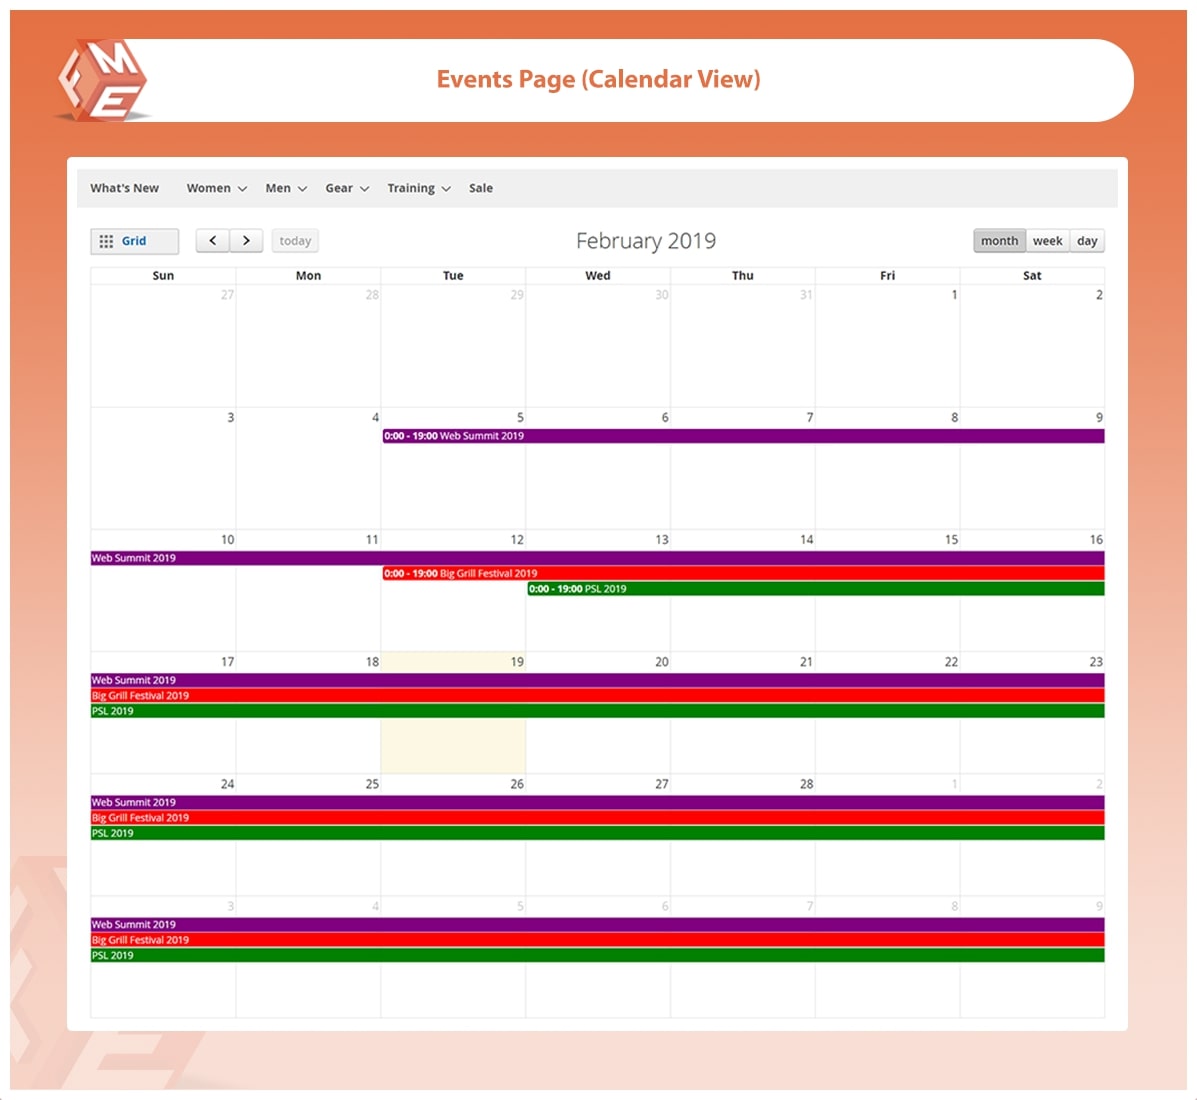 Events Page - Calendar View